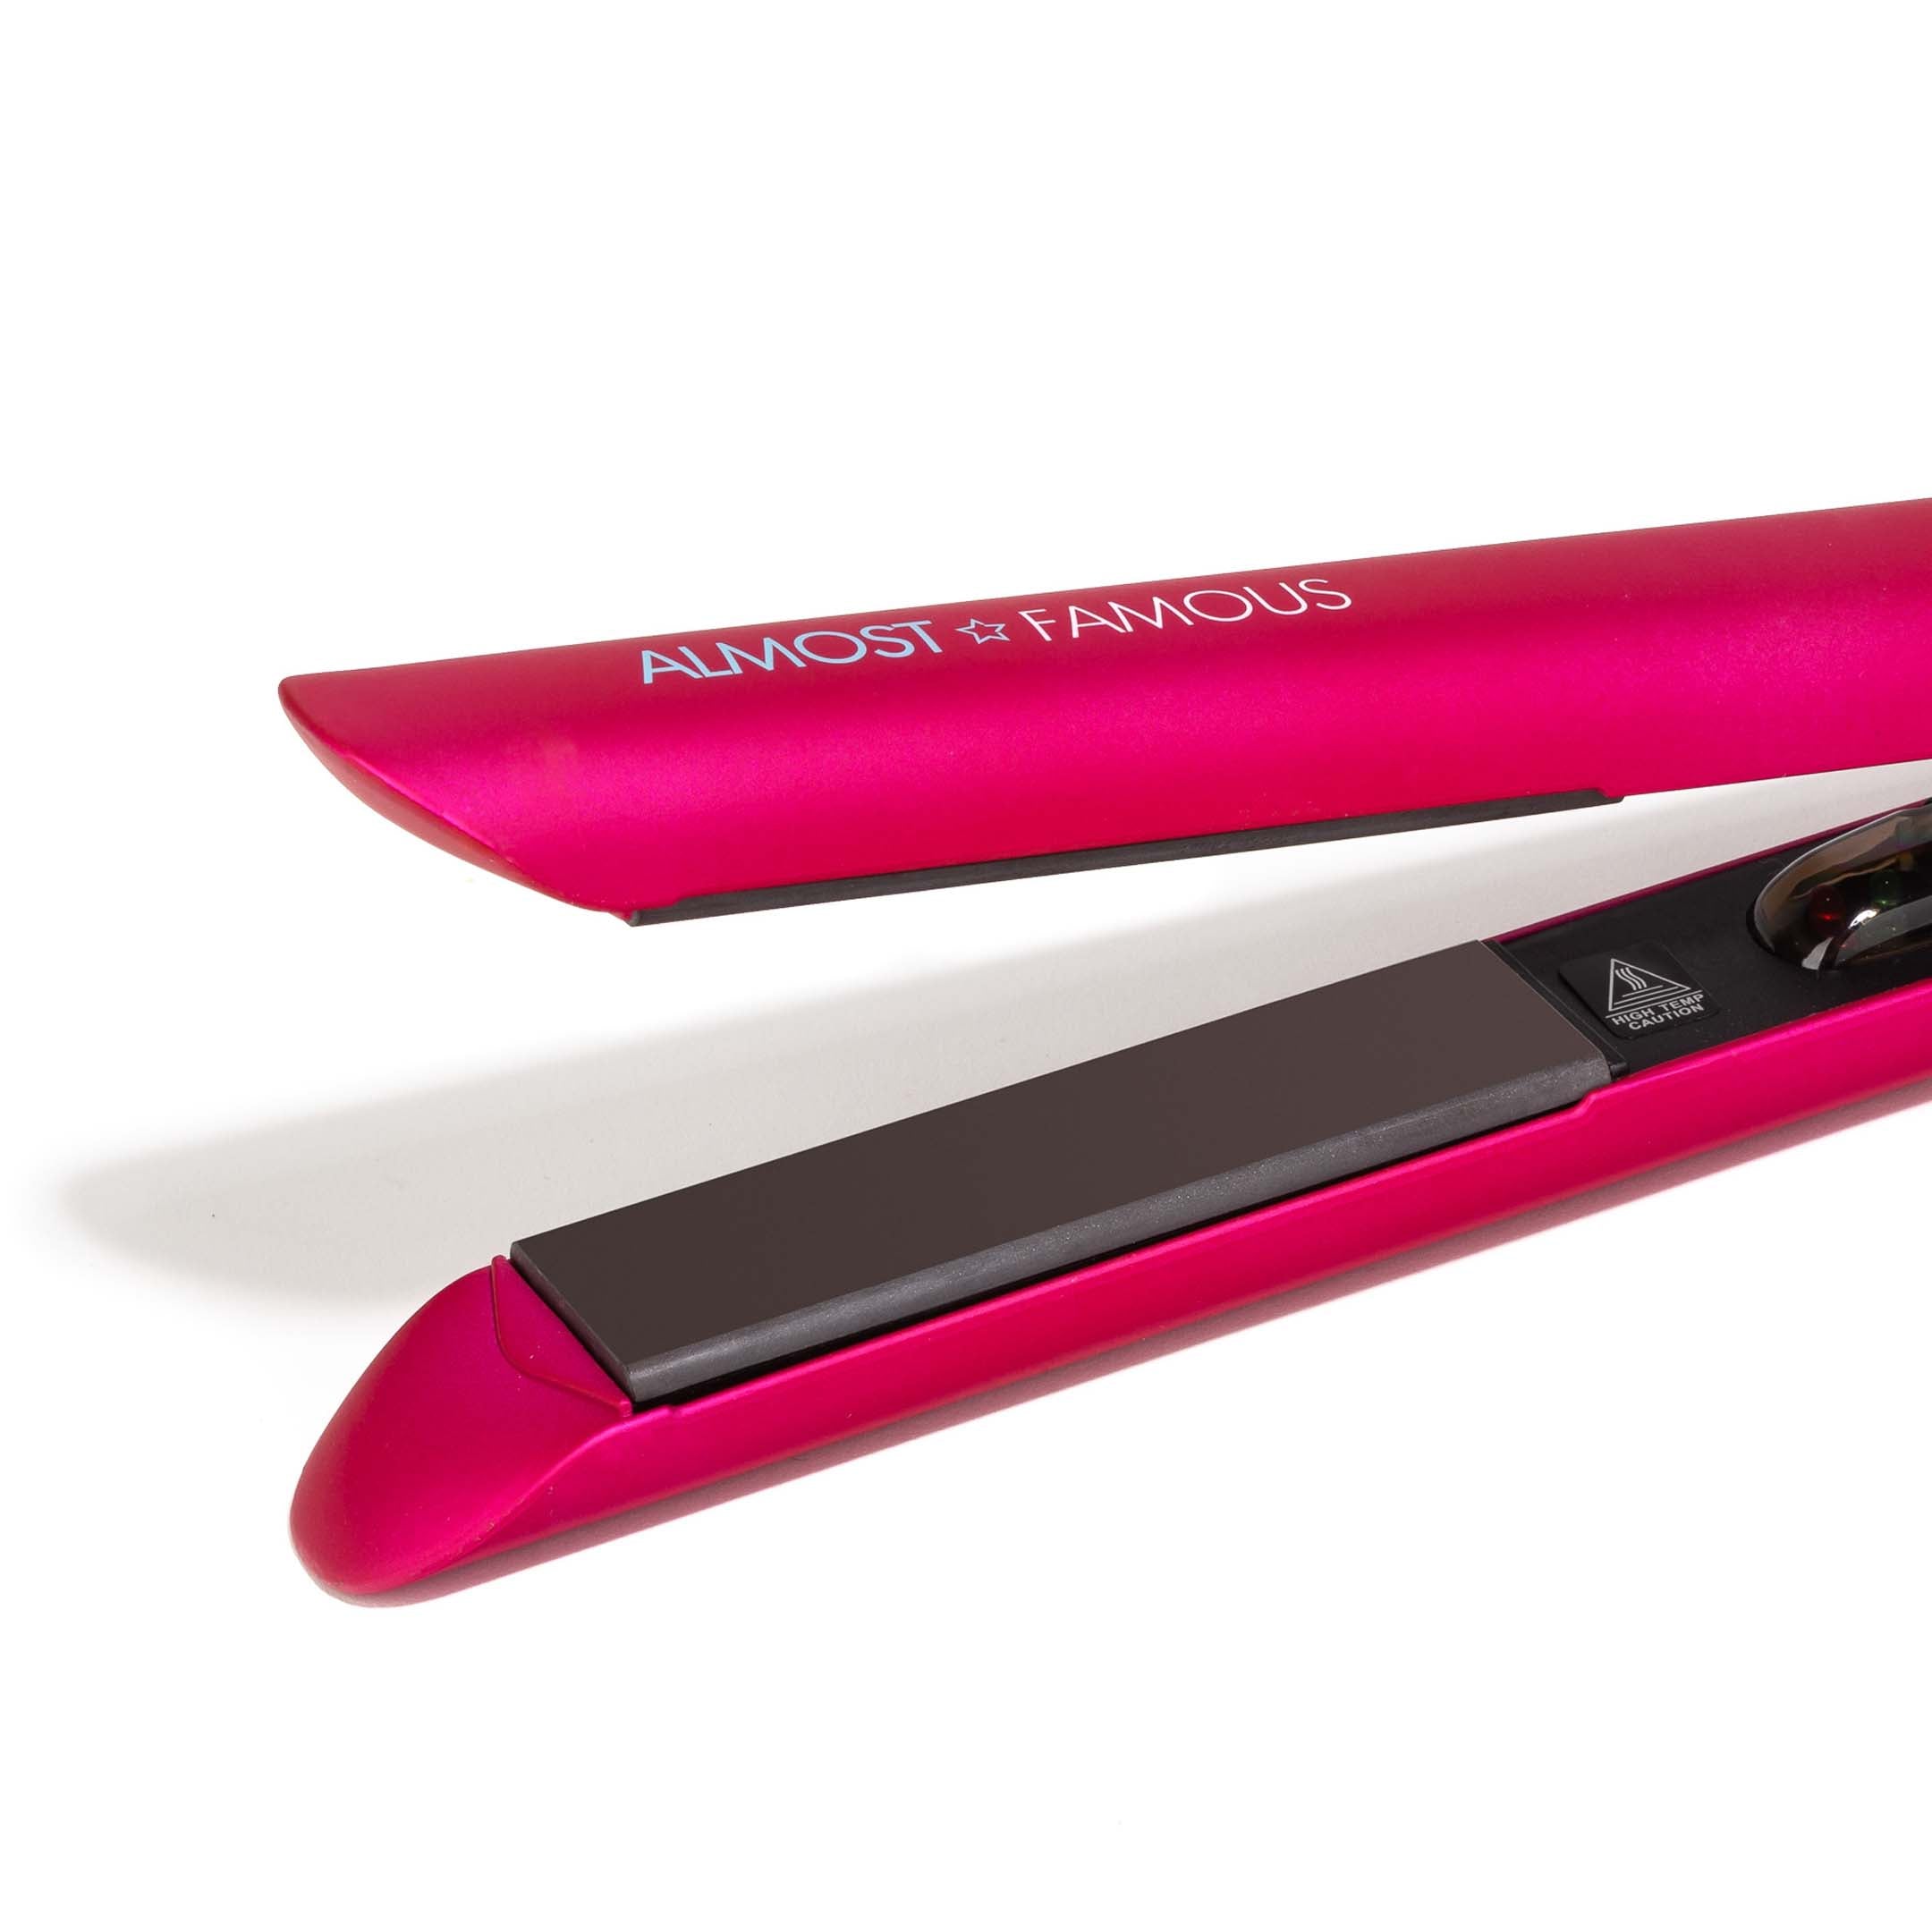 Venice Babe 1.25" Flat Iron with Luxe Gem Infused Plates